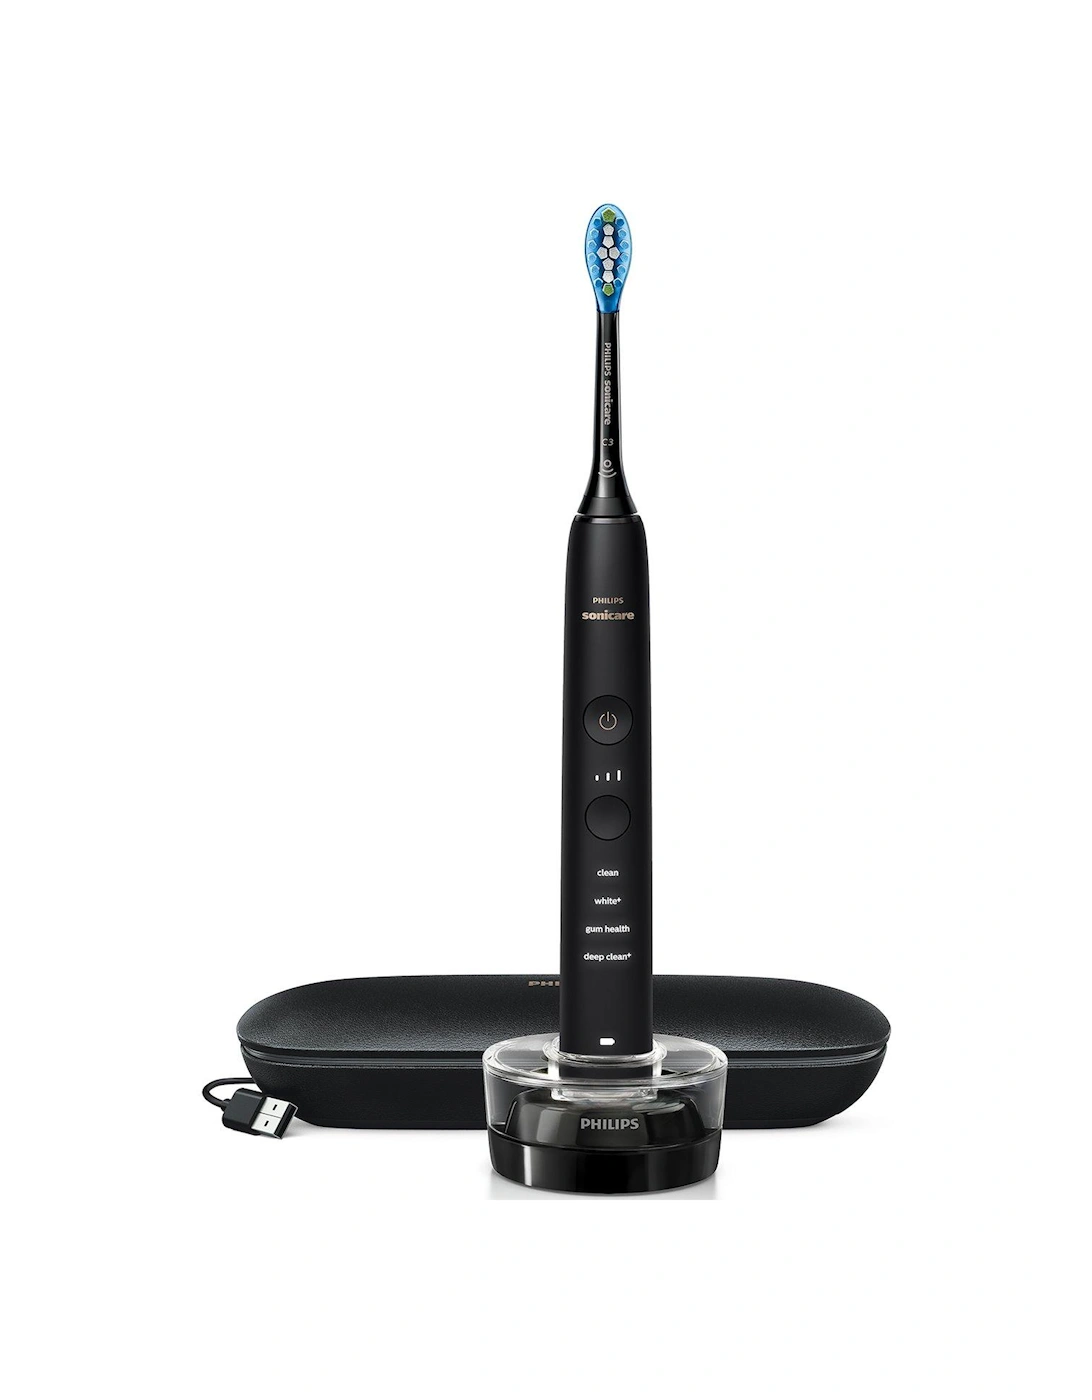 Sonicare DiamondClean 9000 Electric Toothbrush with App, HX9911/39 - Black, 3 of 2